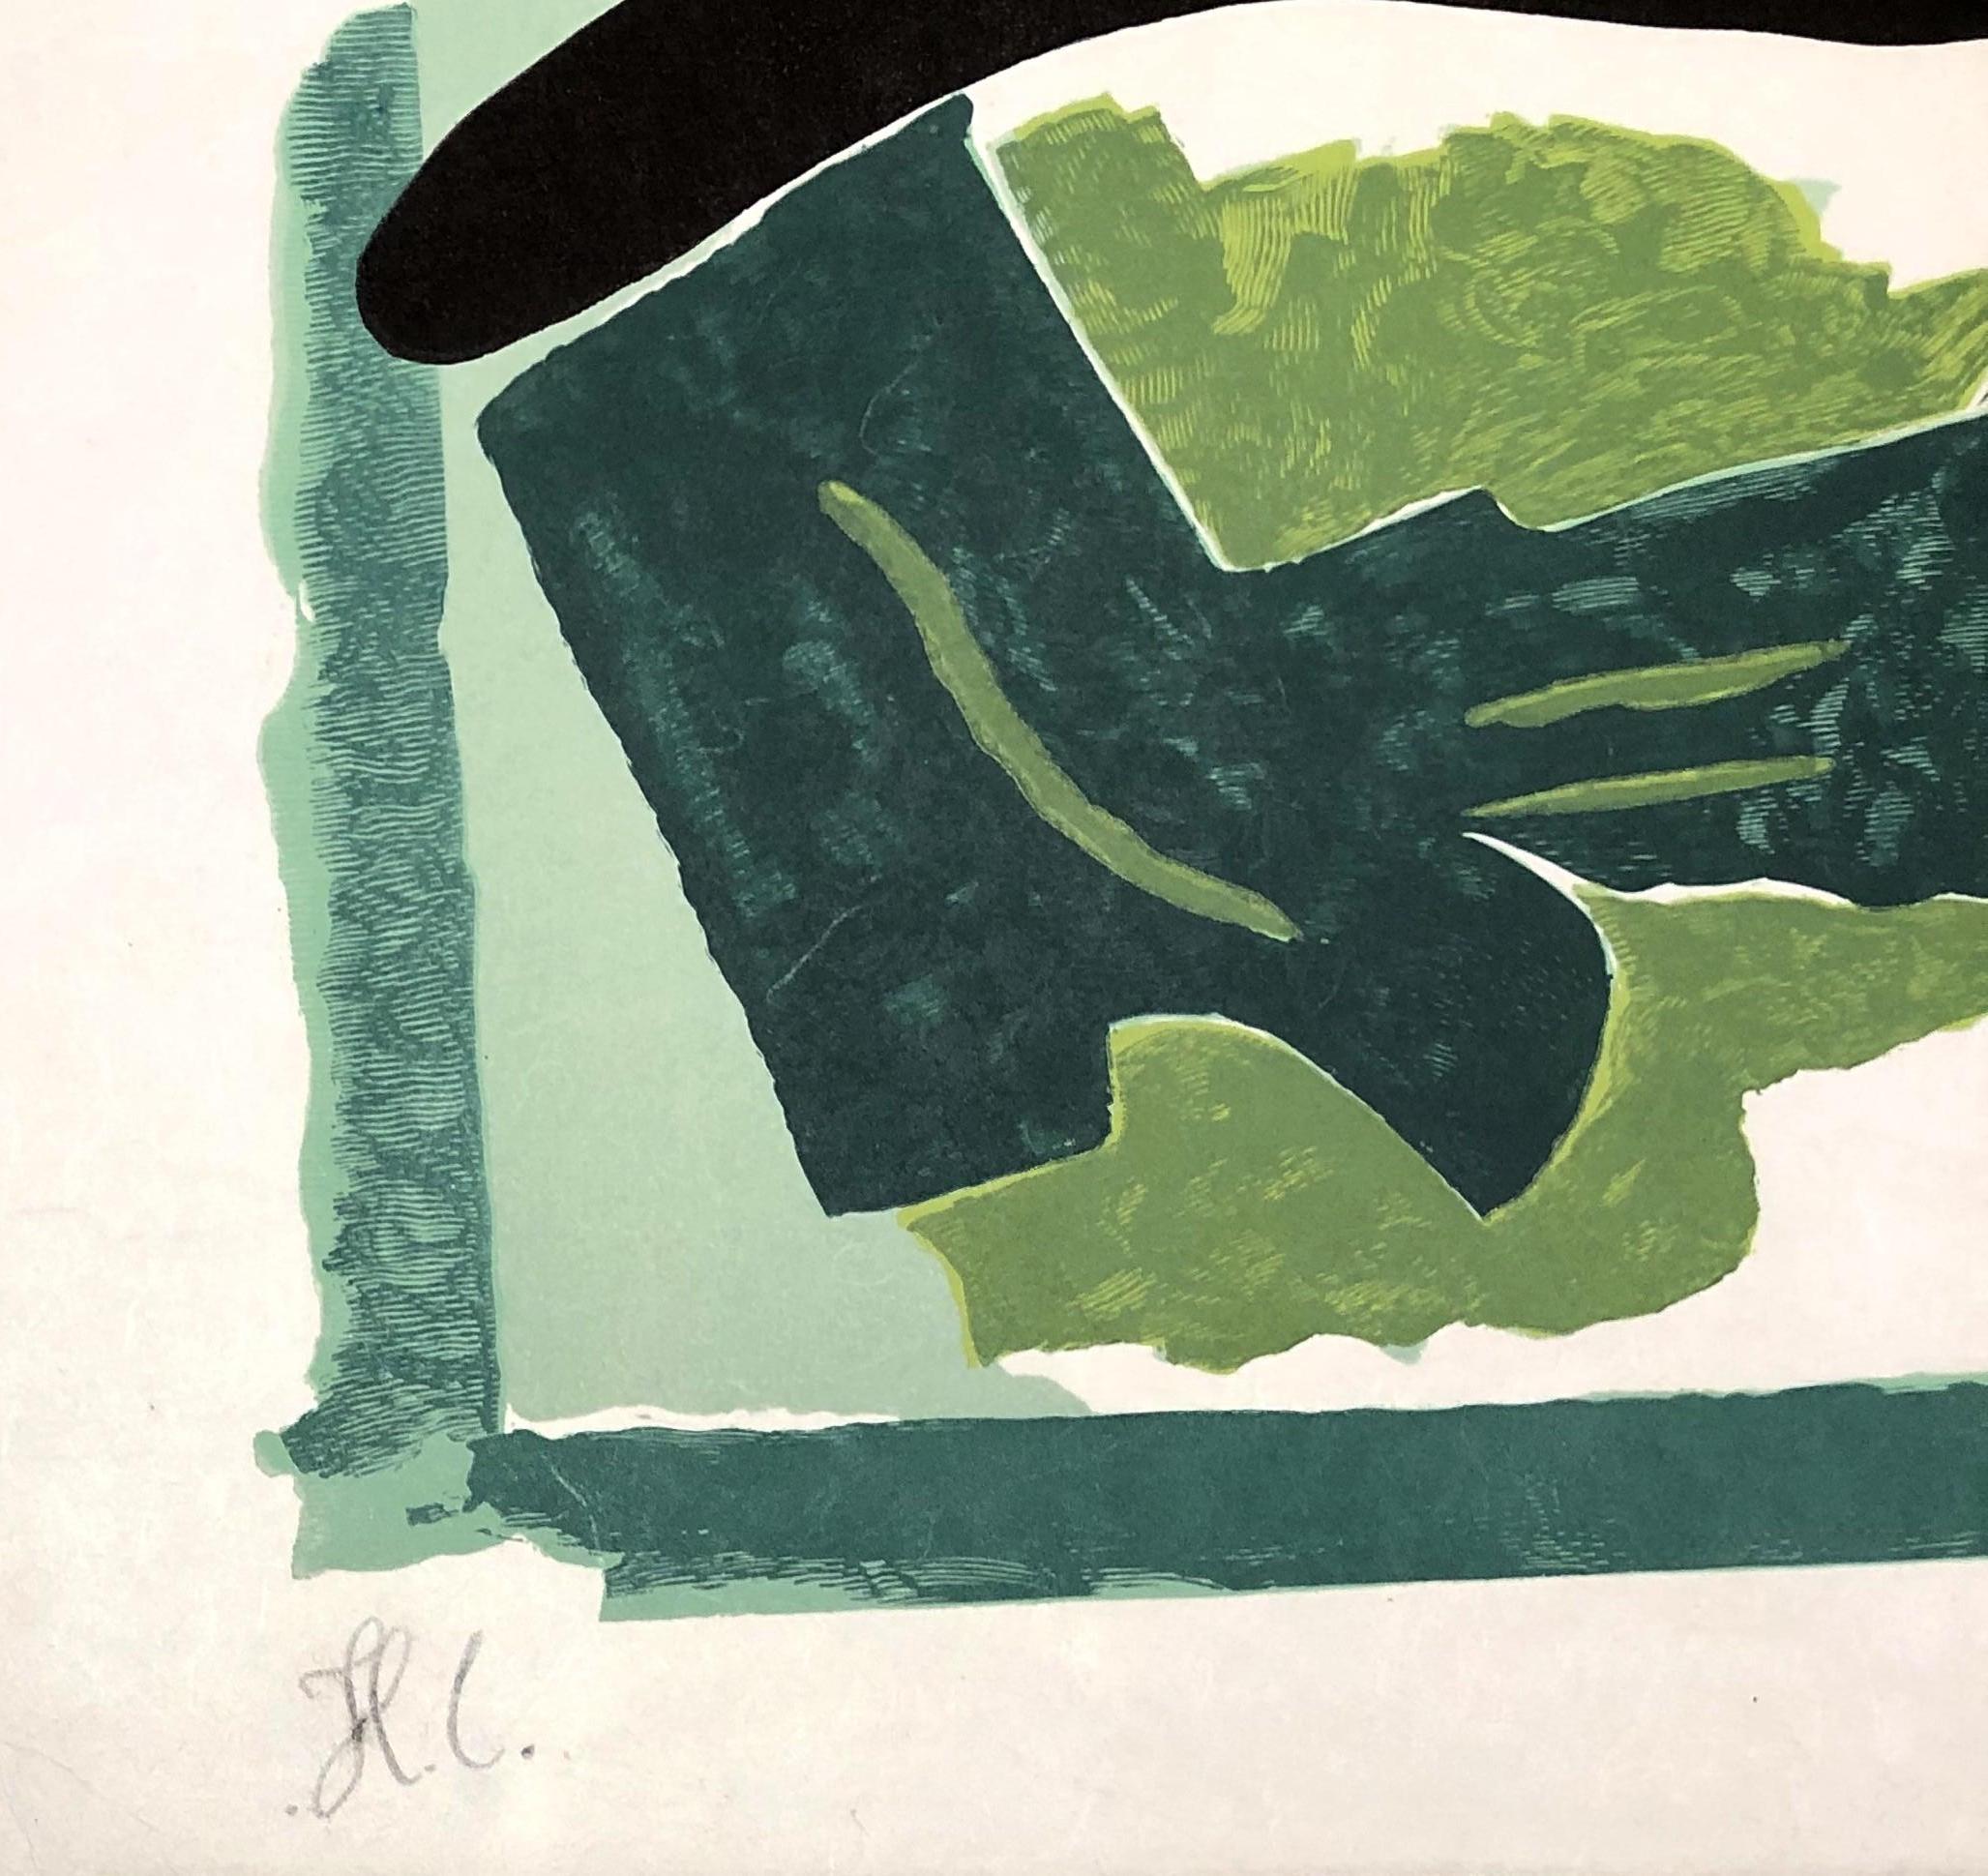 Black Bird On Green Background - Original woodcut handsigned - 50 copies - Gray Figurative Print by Georges Braque